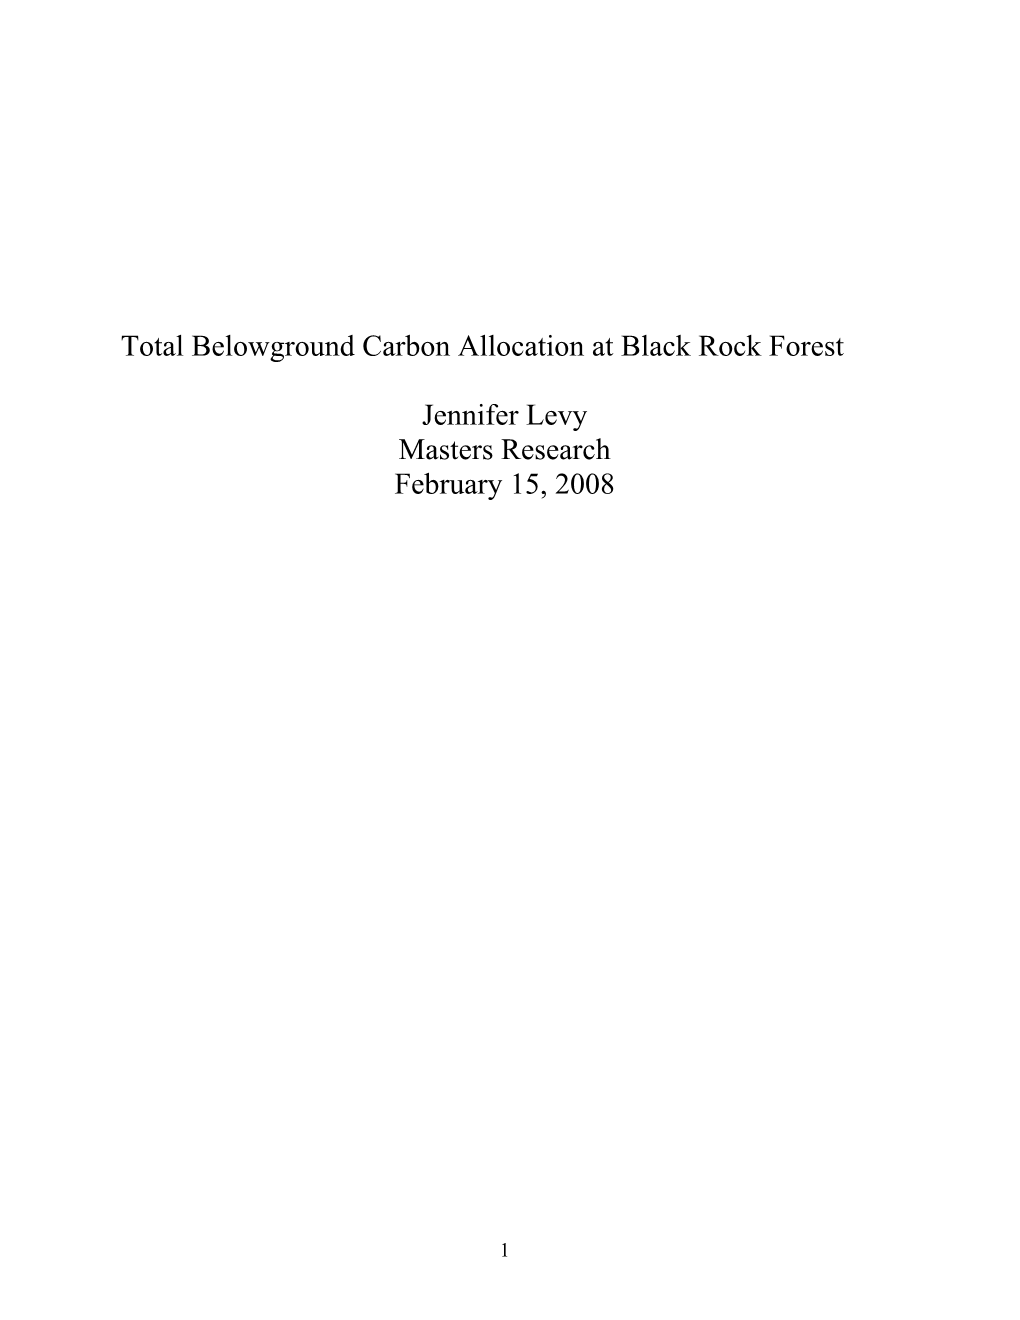 Total Belowground Carbon Allocation at Black Rock Forest